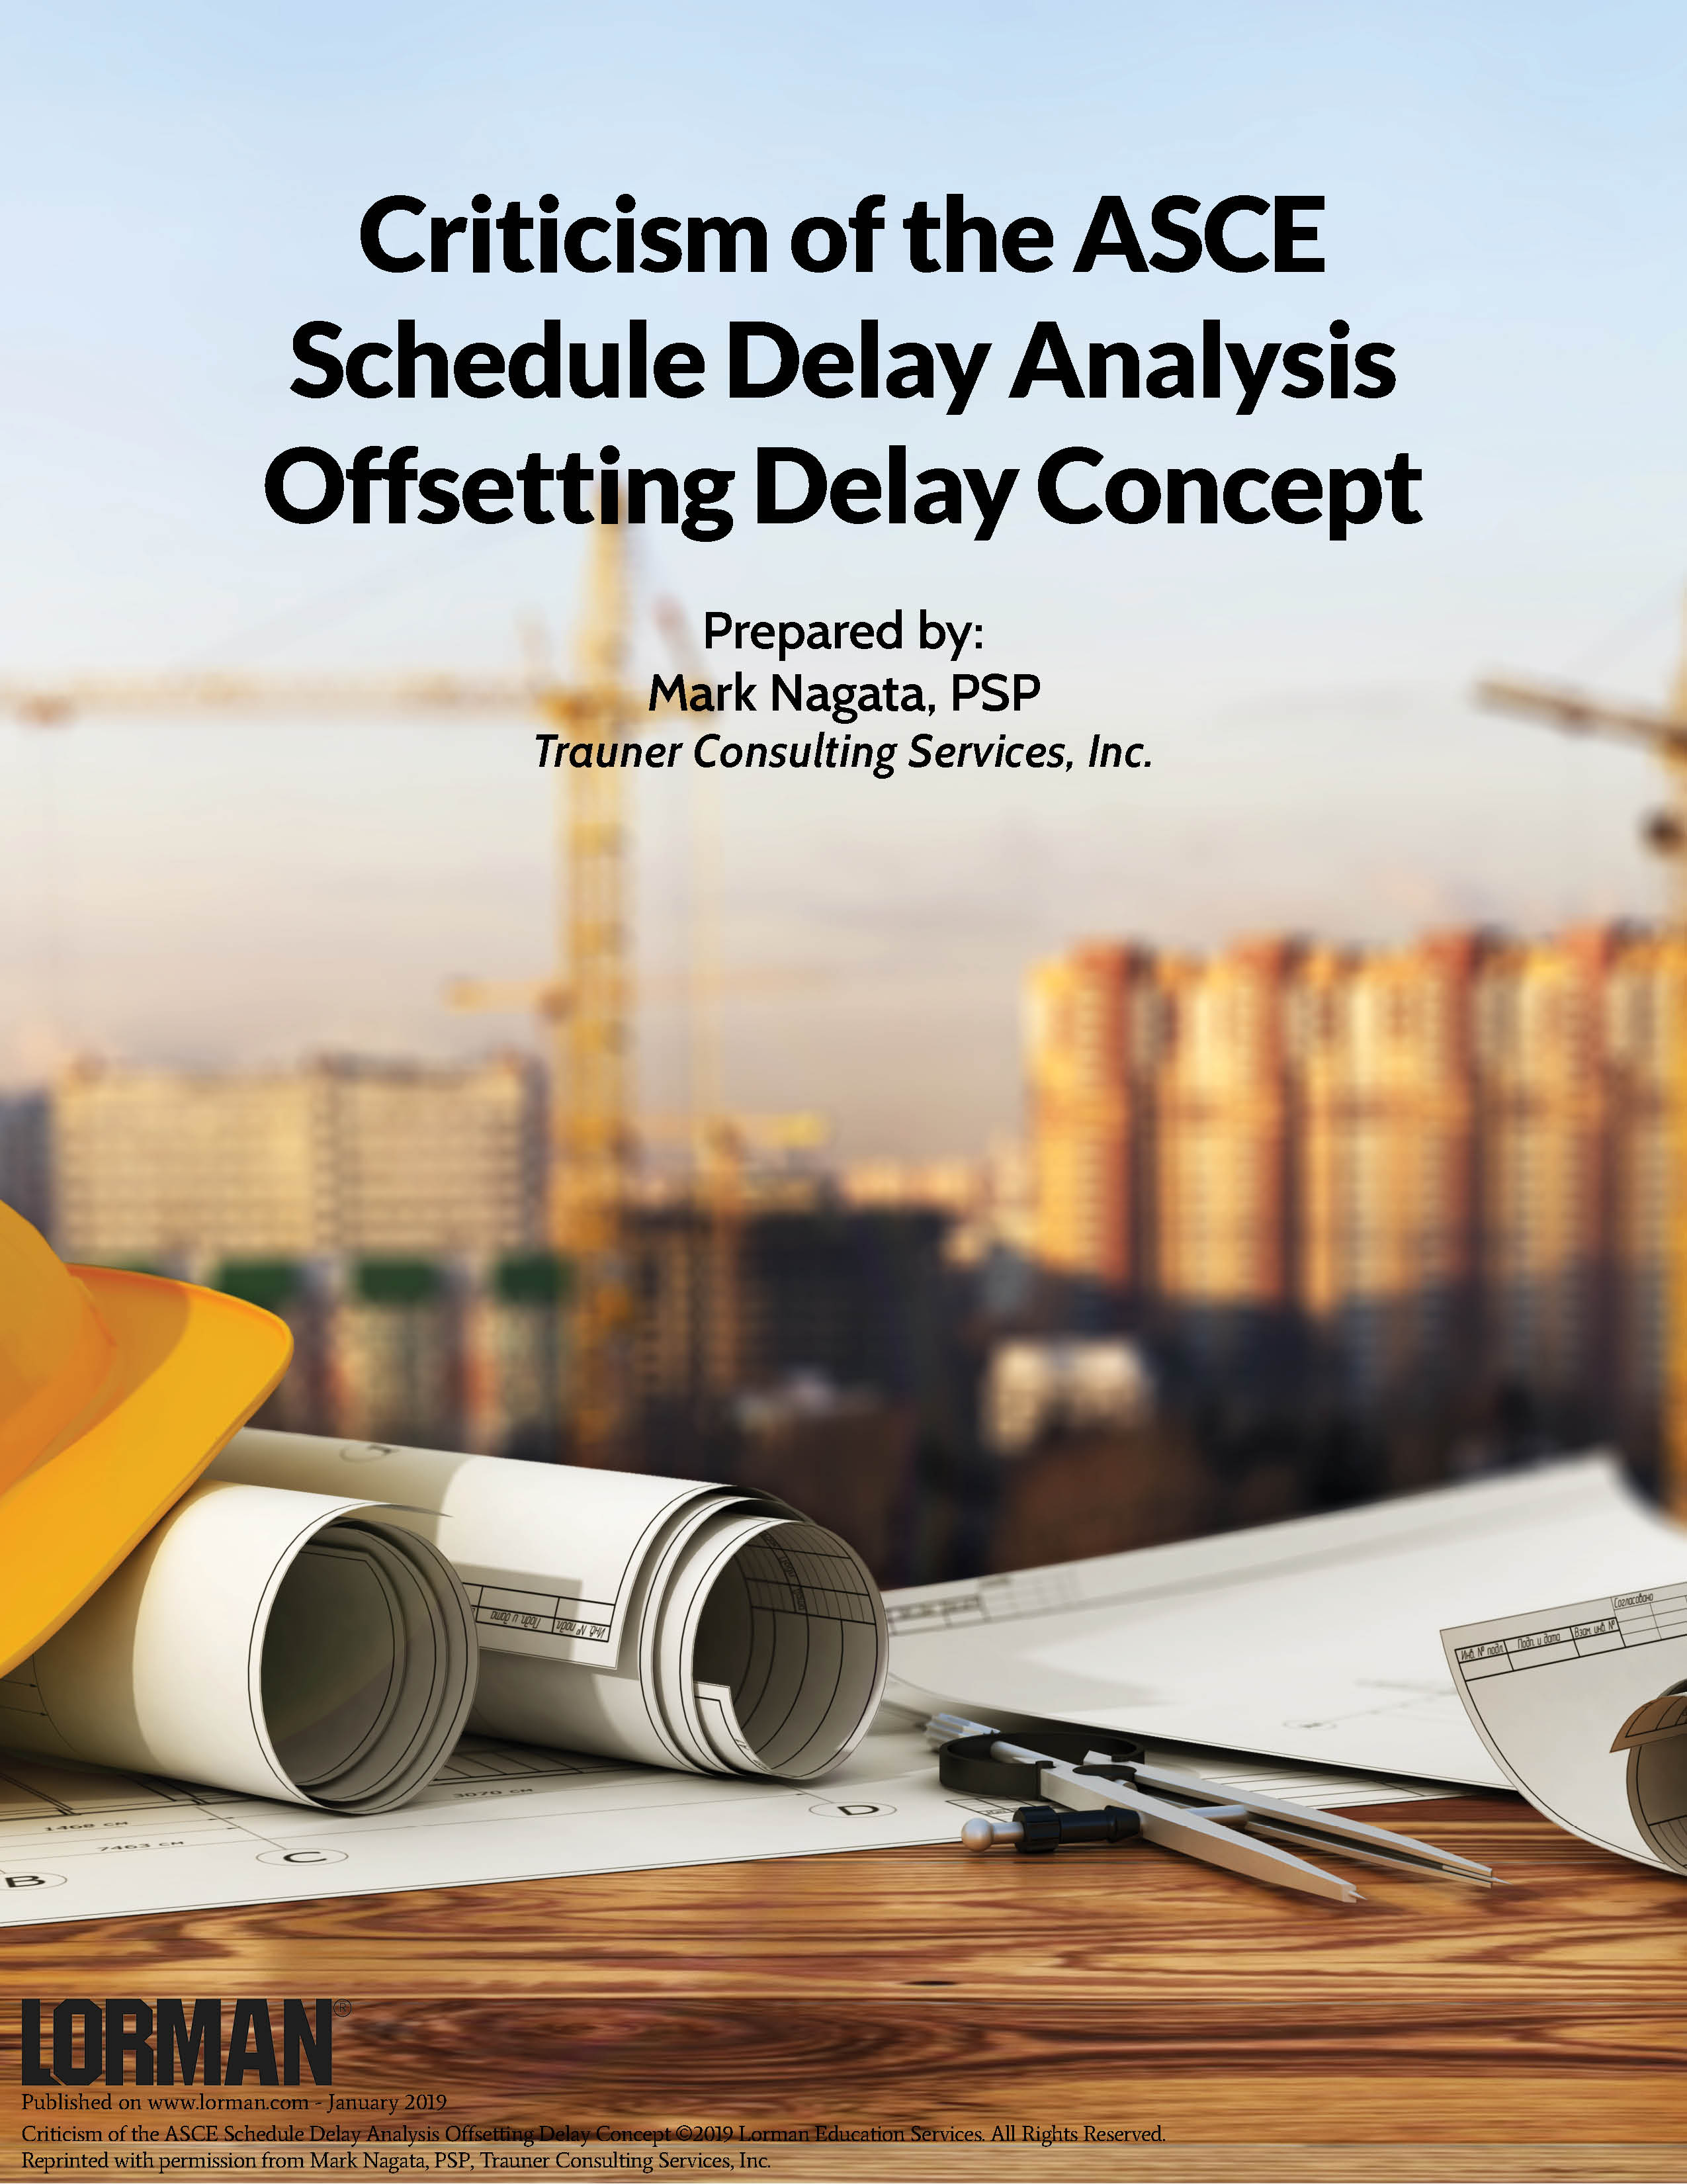 Criticism of the ASCE Schedule Delay Analysis Offsetting Delay Concept